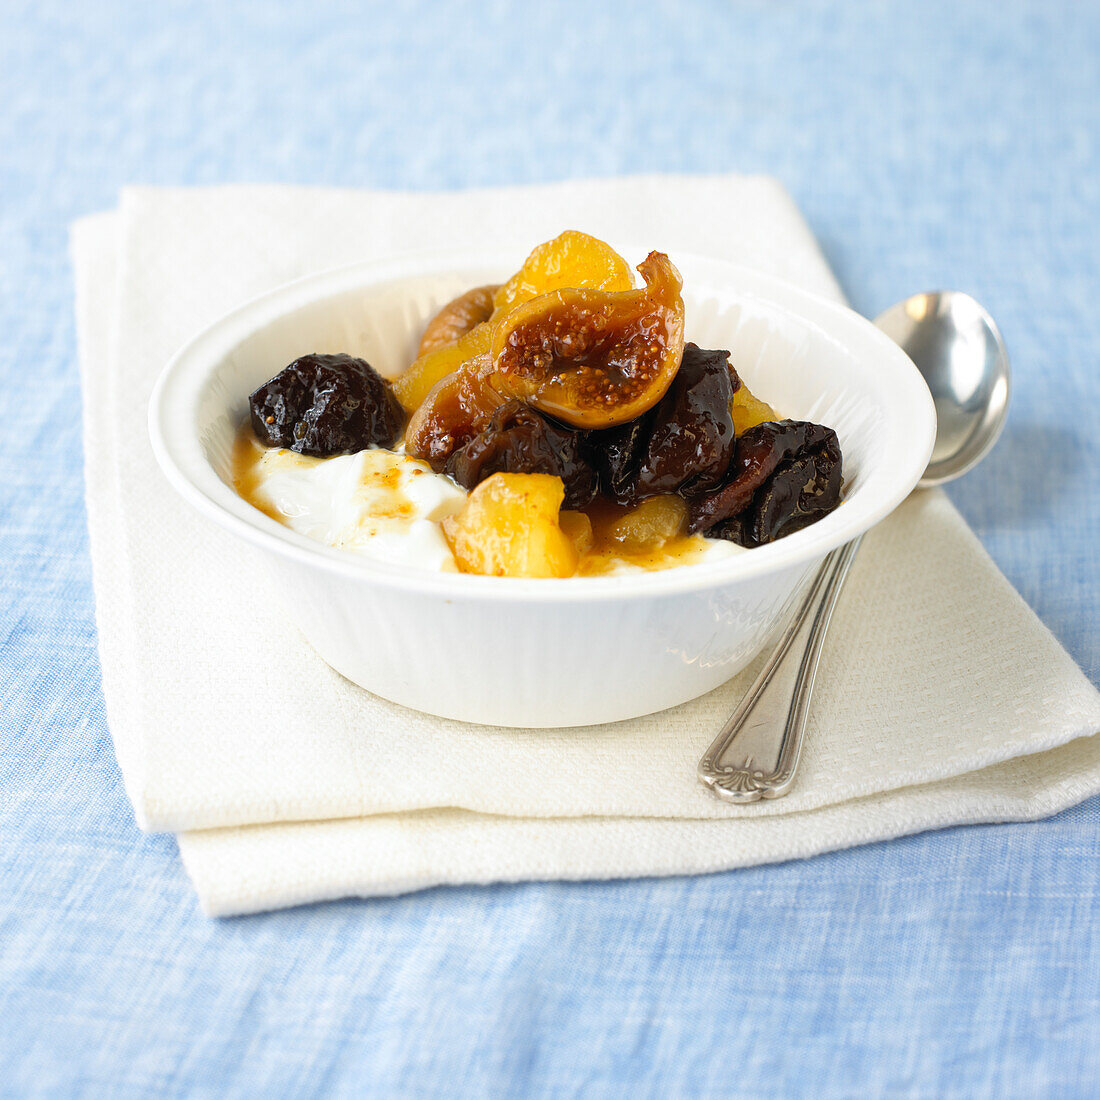 Stewed autumn fruit compote